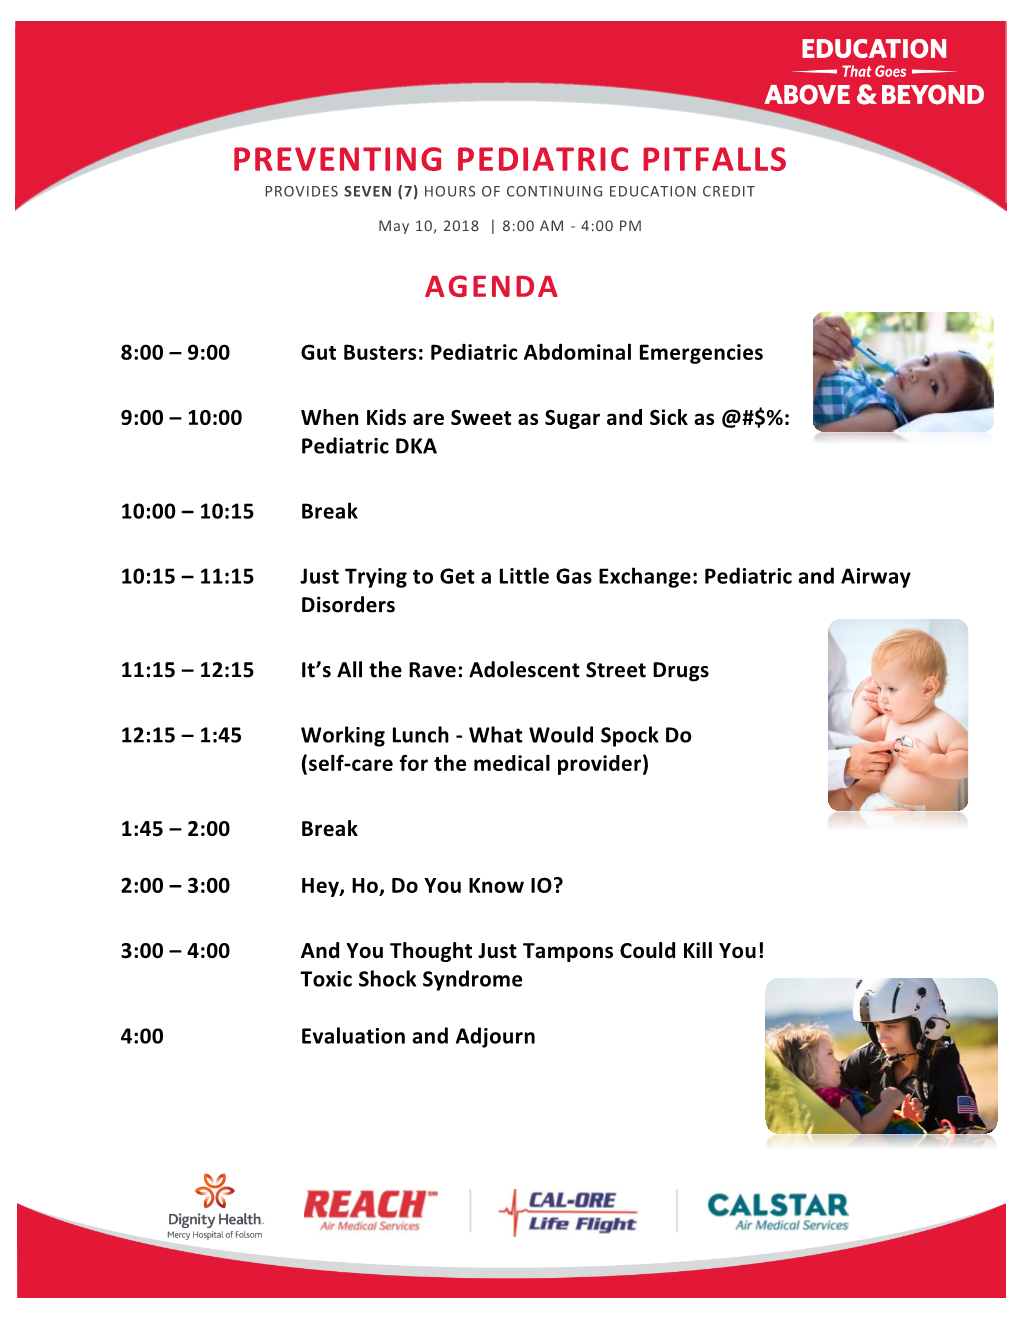 Preventing Pediatric Pitfalls Provides Seven (7) Hours of Continuing Education Credit